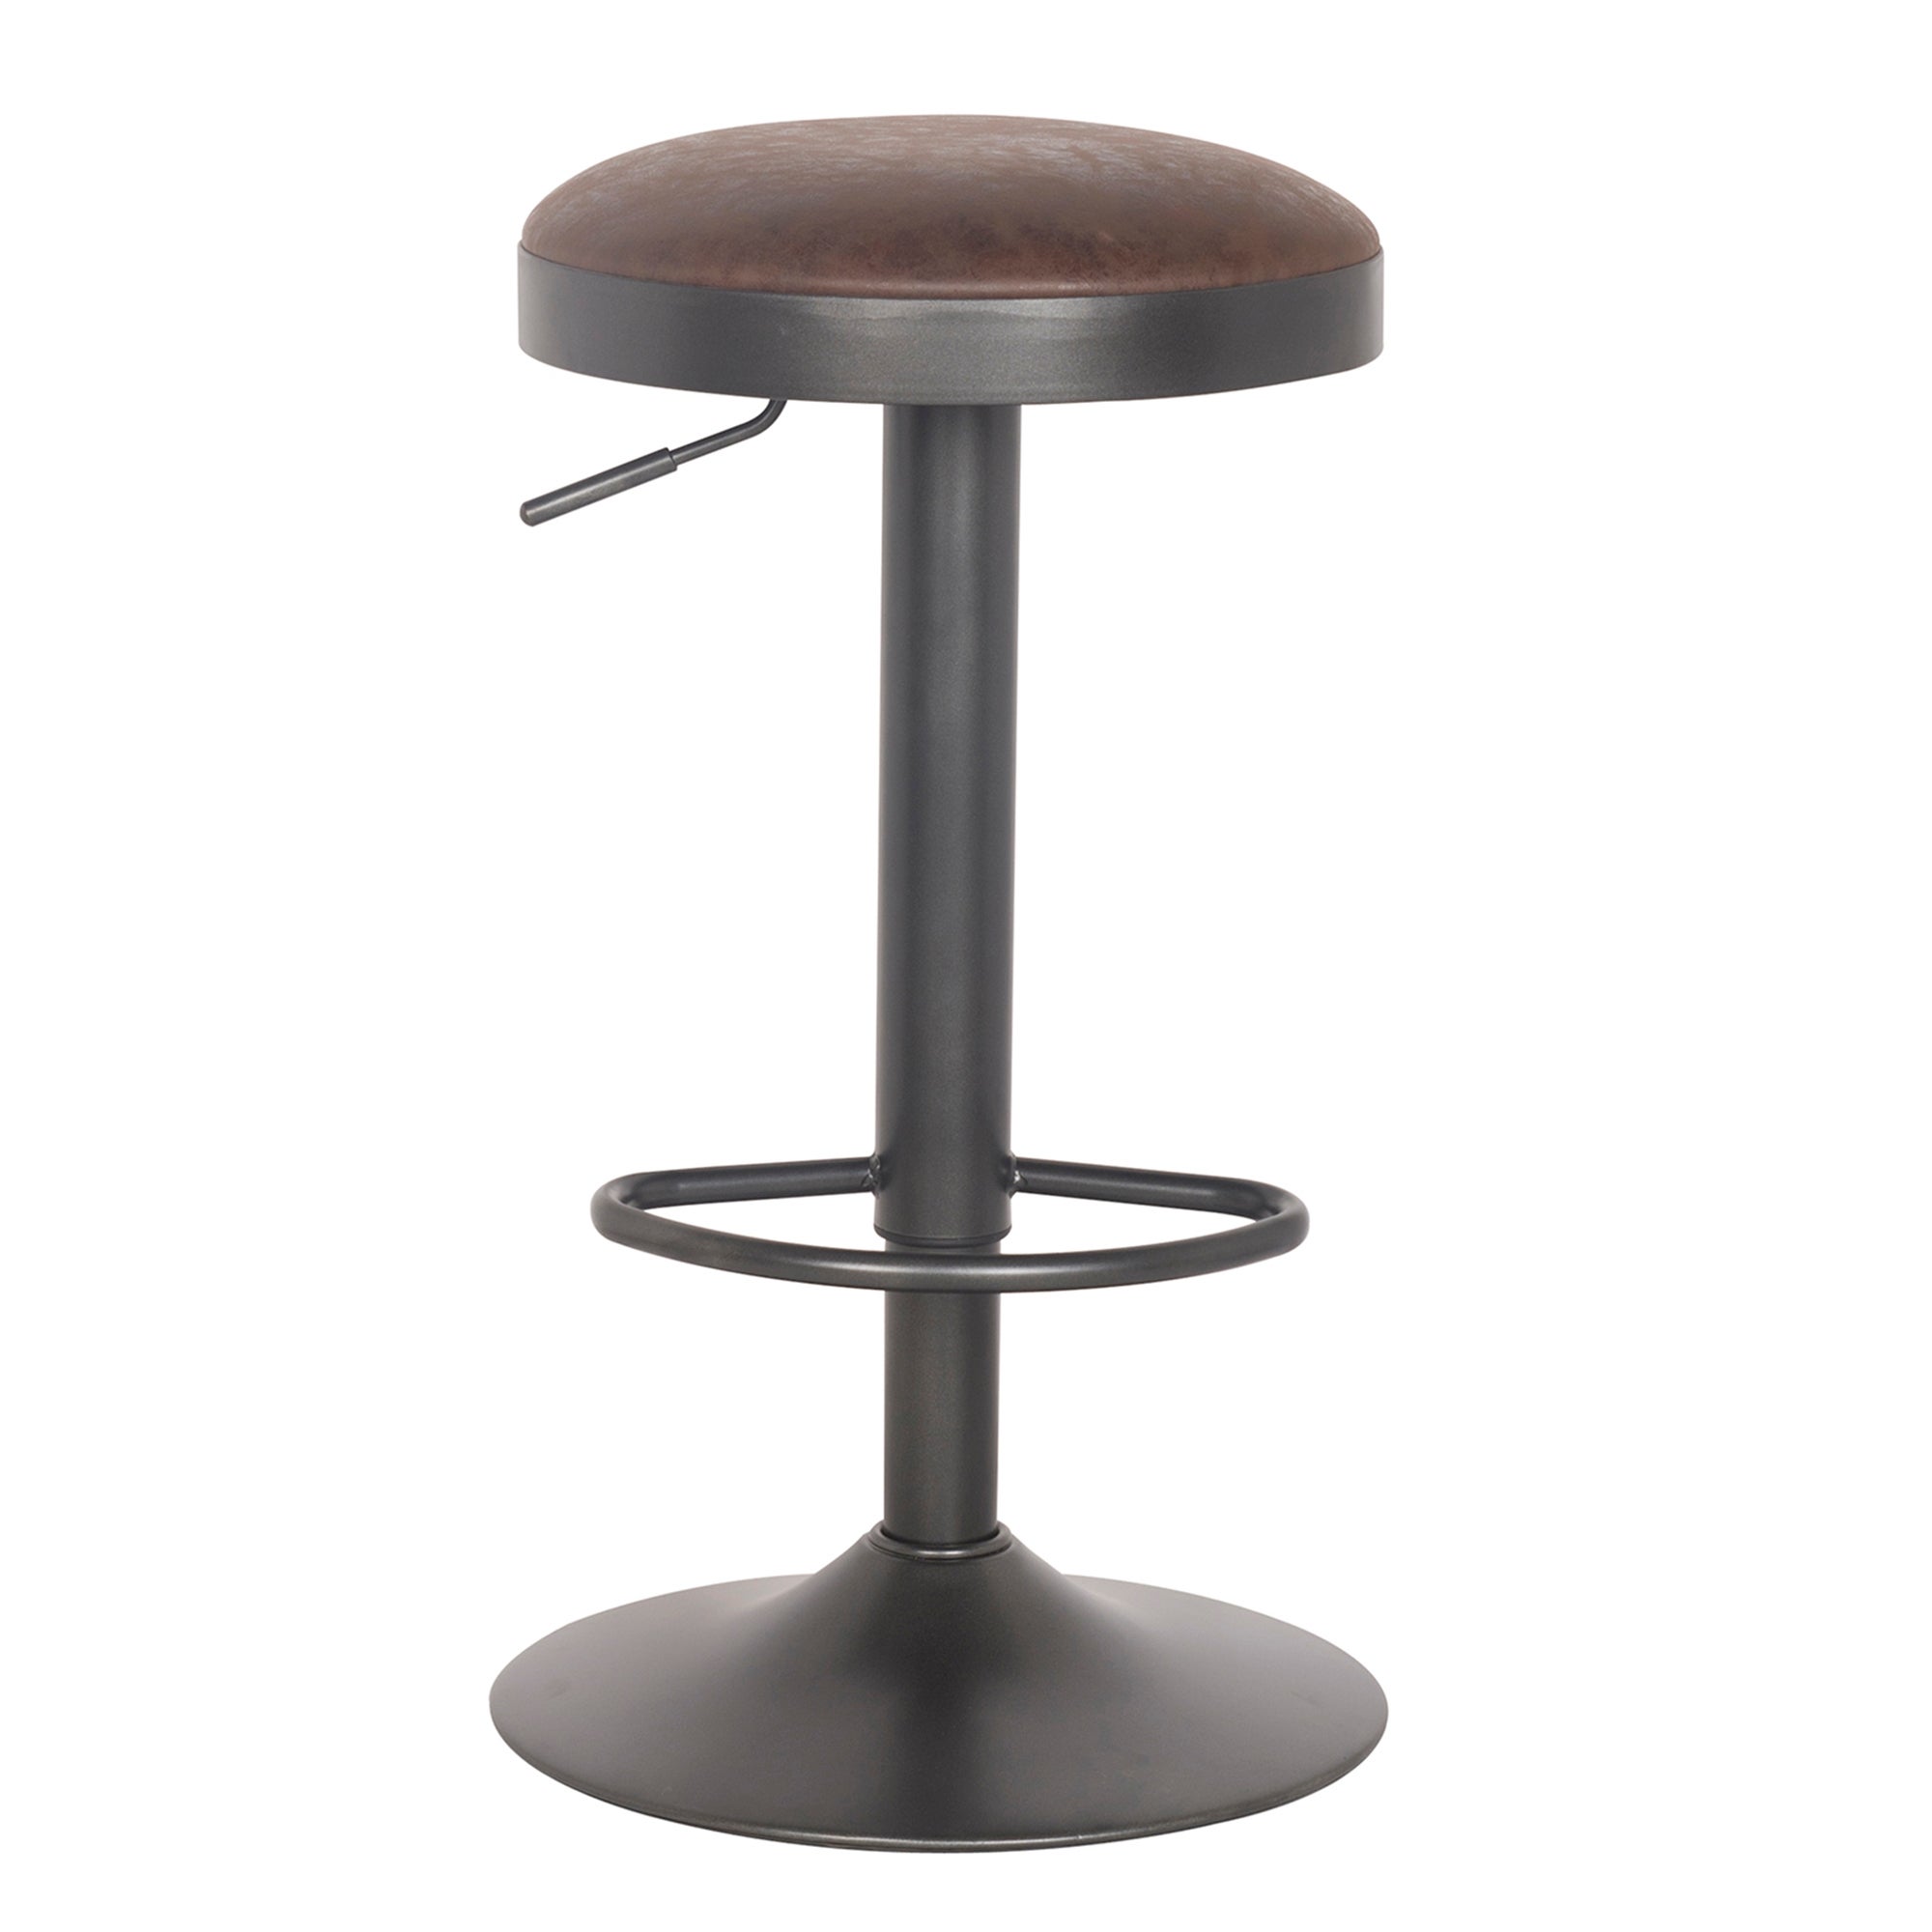 Terni Adjustable Height Bar Stool Faux Leather Antique Brown